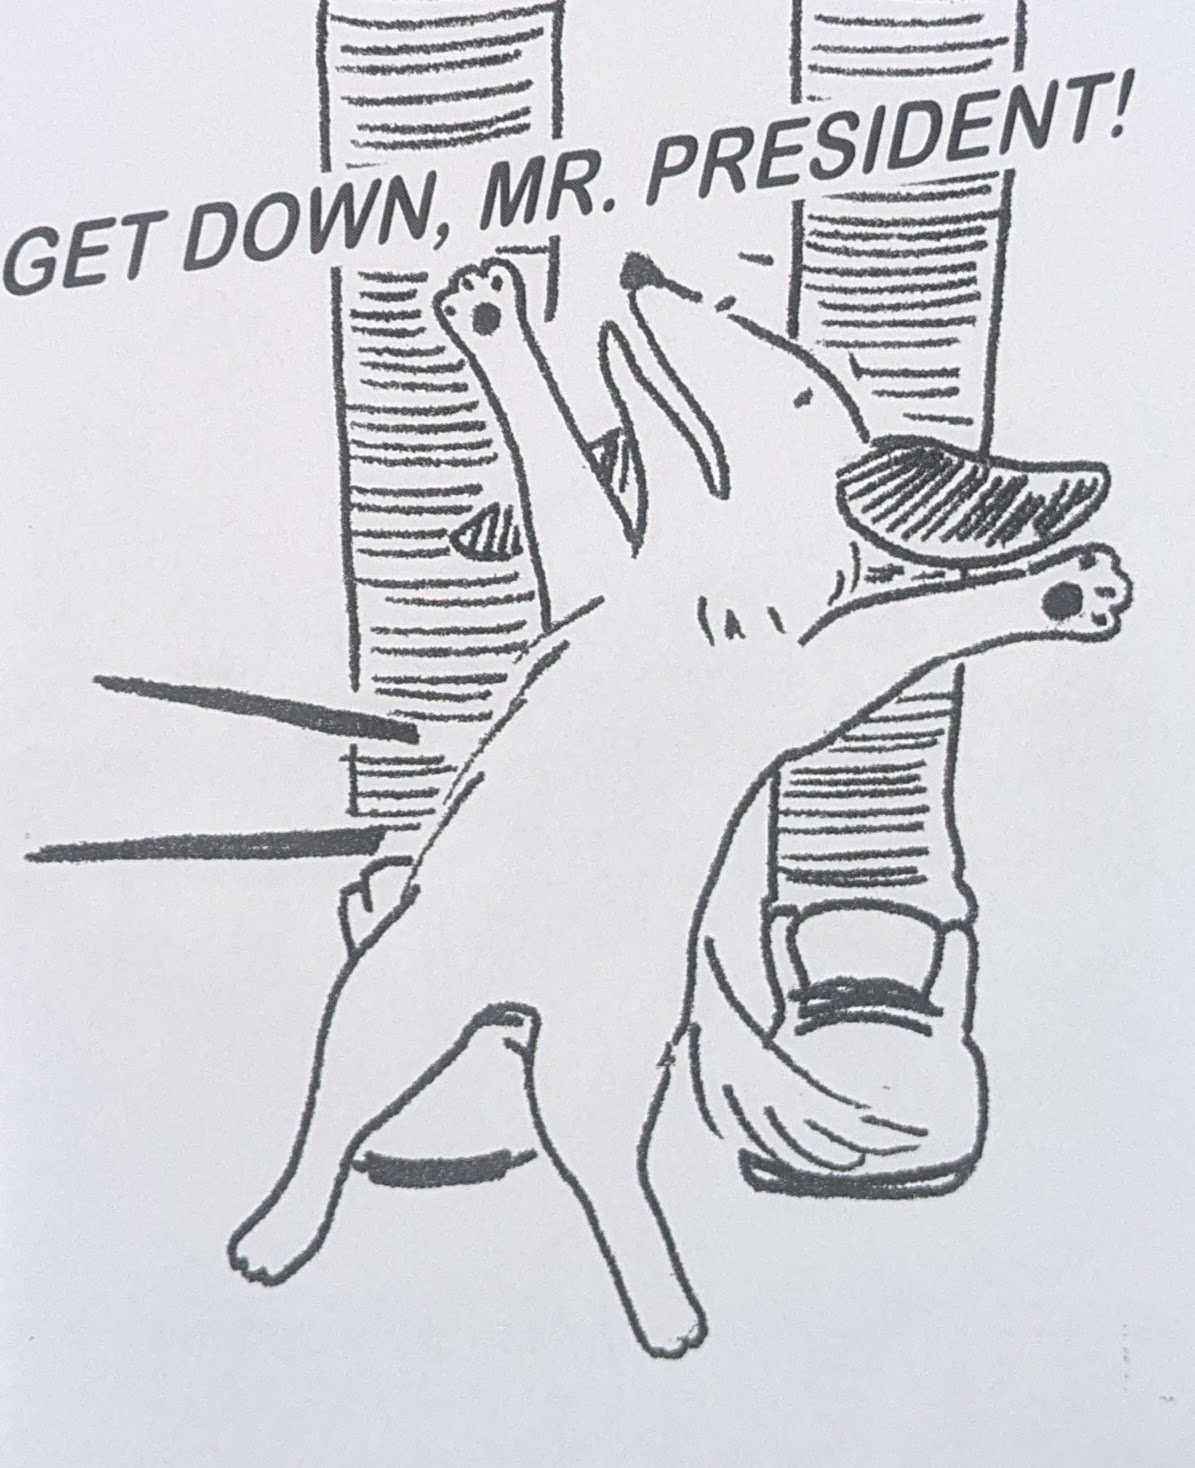 The cover of the zine “Get Down Mr. President.” An illustration of a little dog leaping dramatically in front of a pair of legs. 